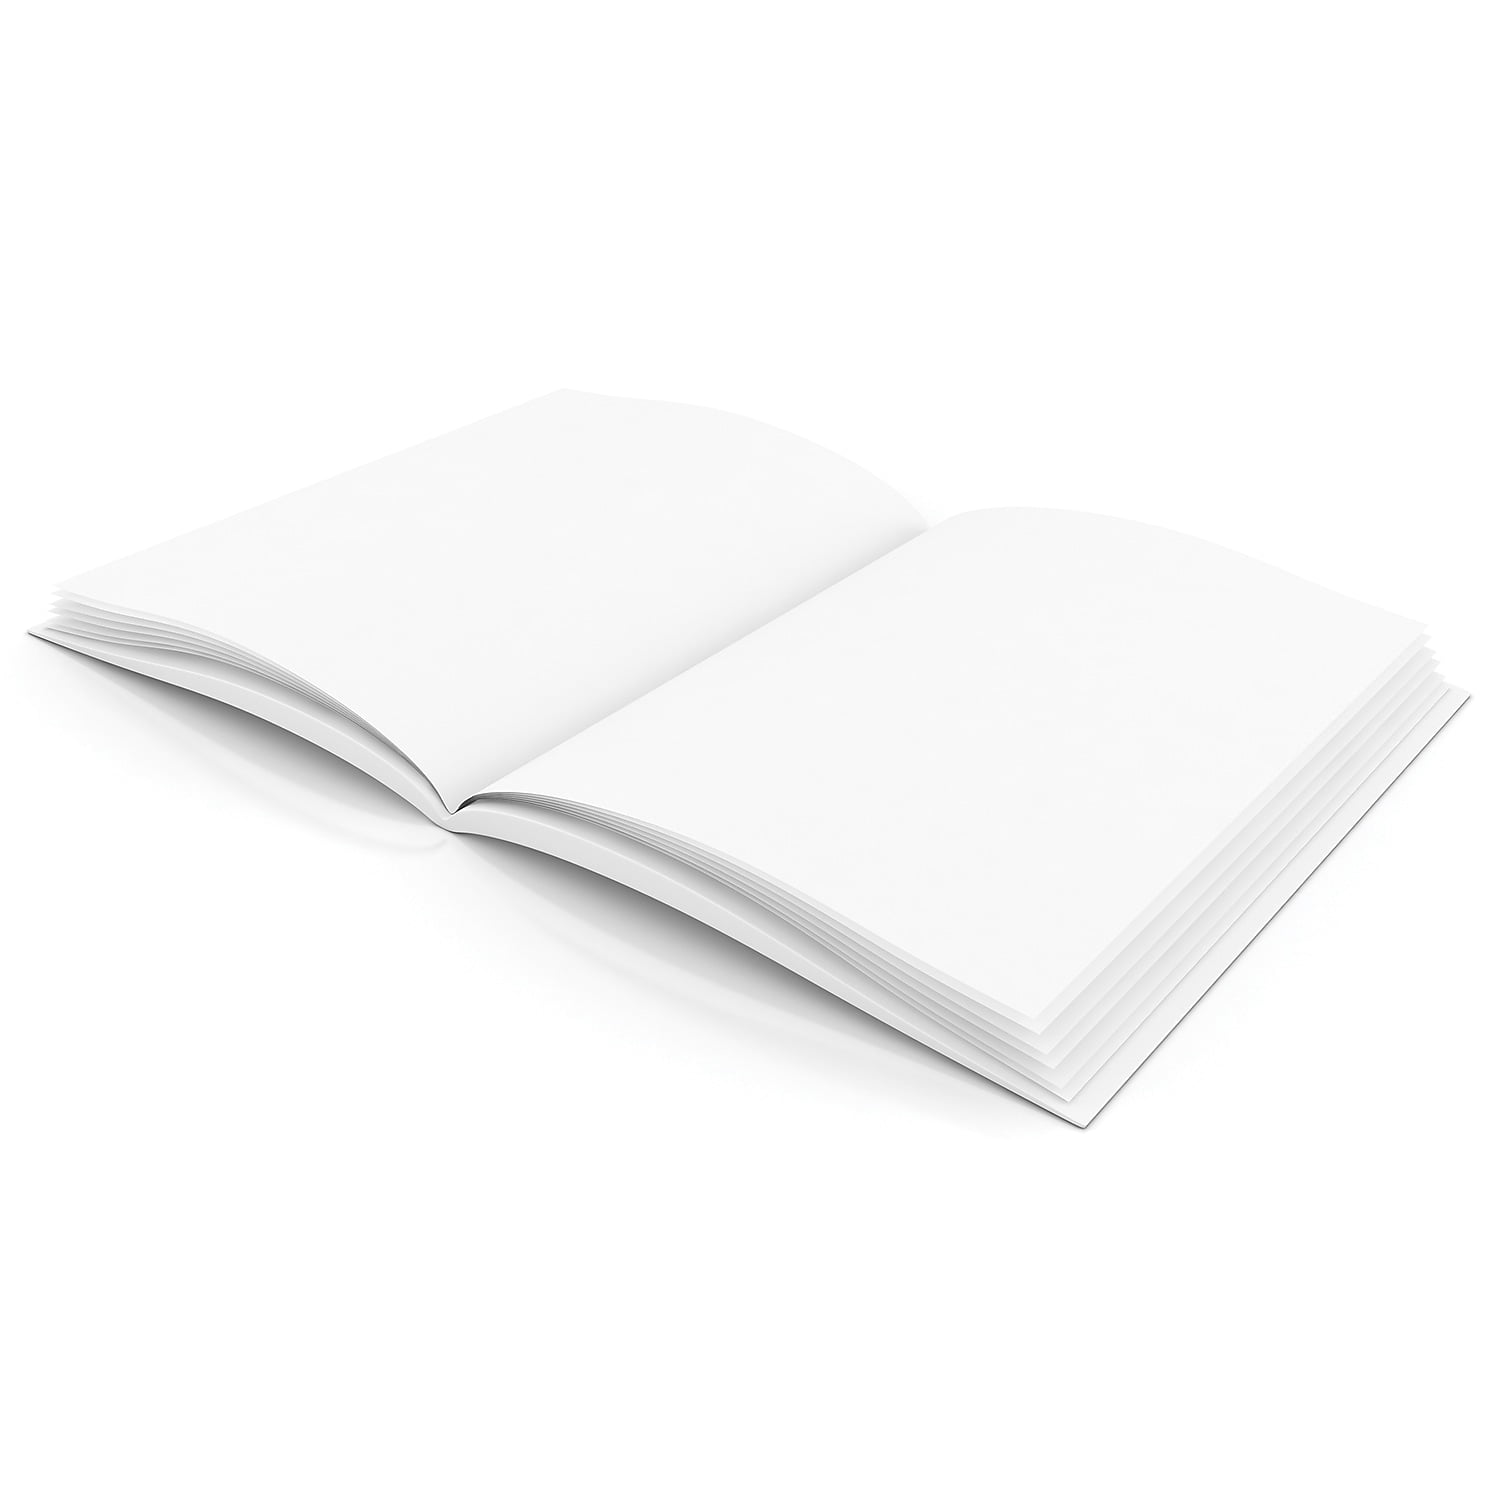 Blue Hardcover Blank Book, White Pages, 8H x 6W Portrait, 14 Sheets/28  Pages | Bundle of 10 Each